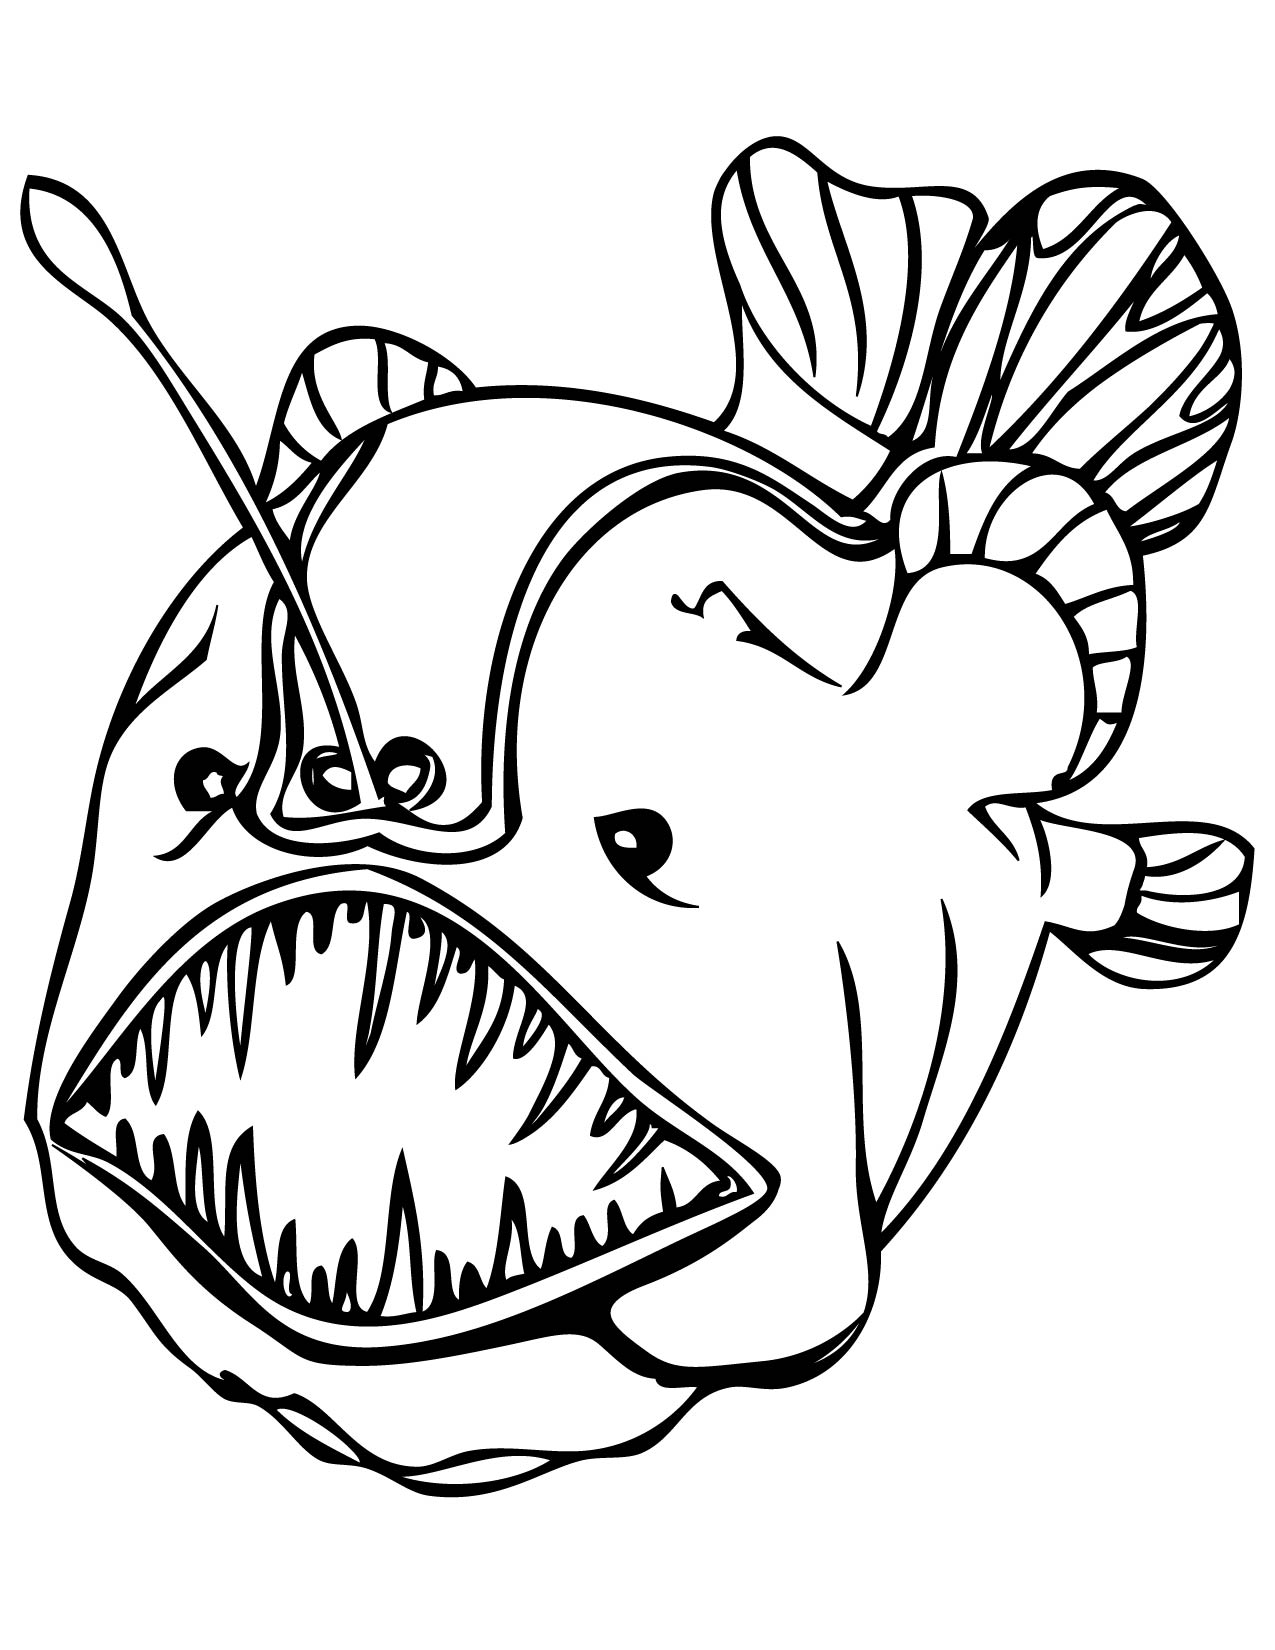 Tuna Coloring Pages at GetColorings.com | Free printable colorings